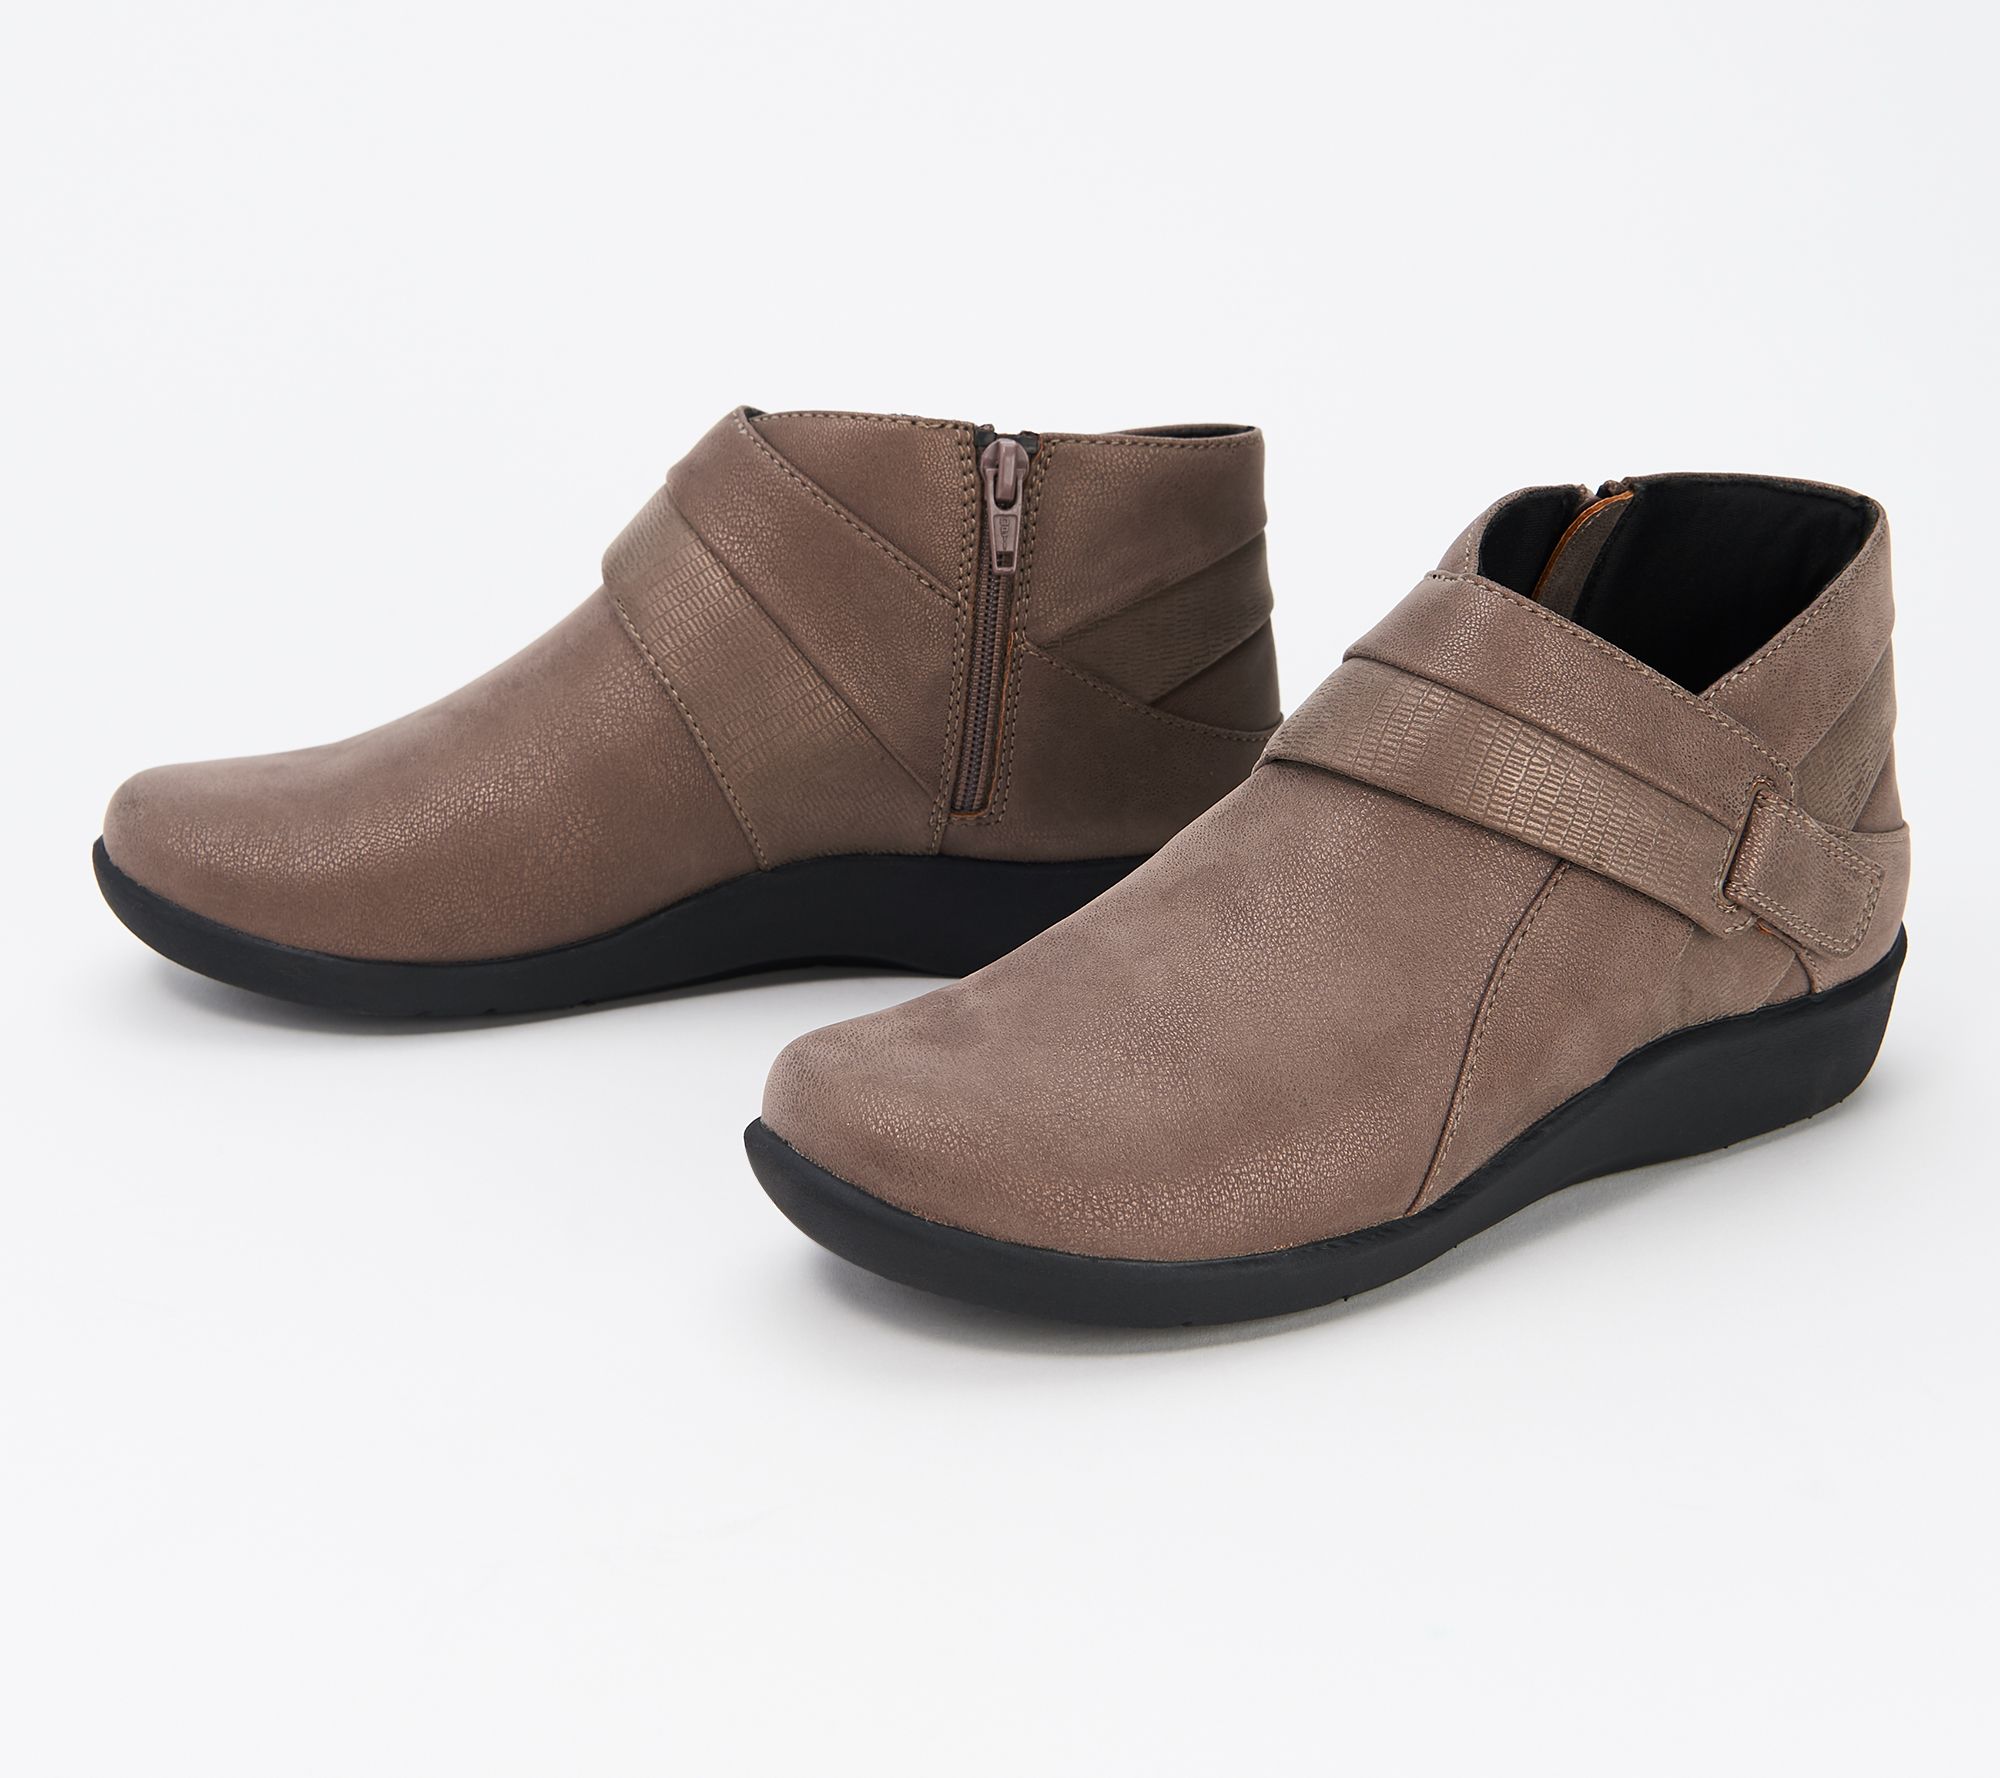 cloudsteppers by clarks sillian rima bootie